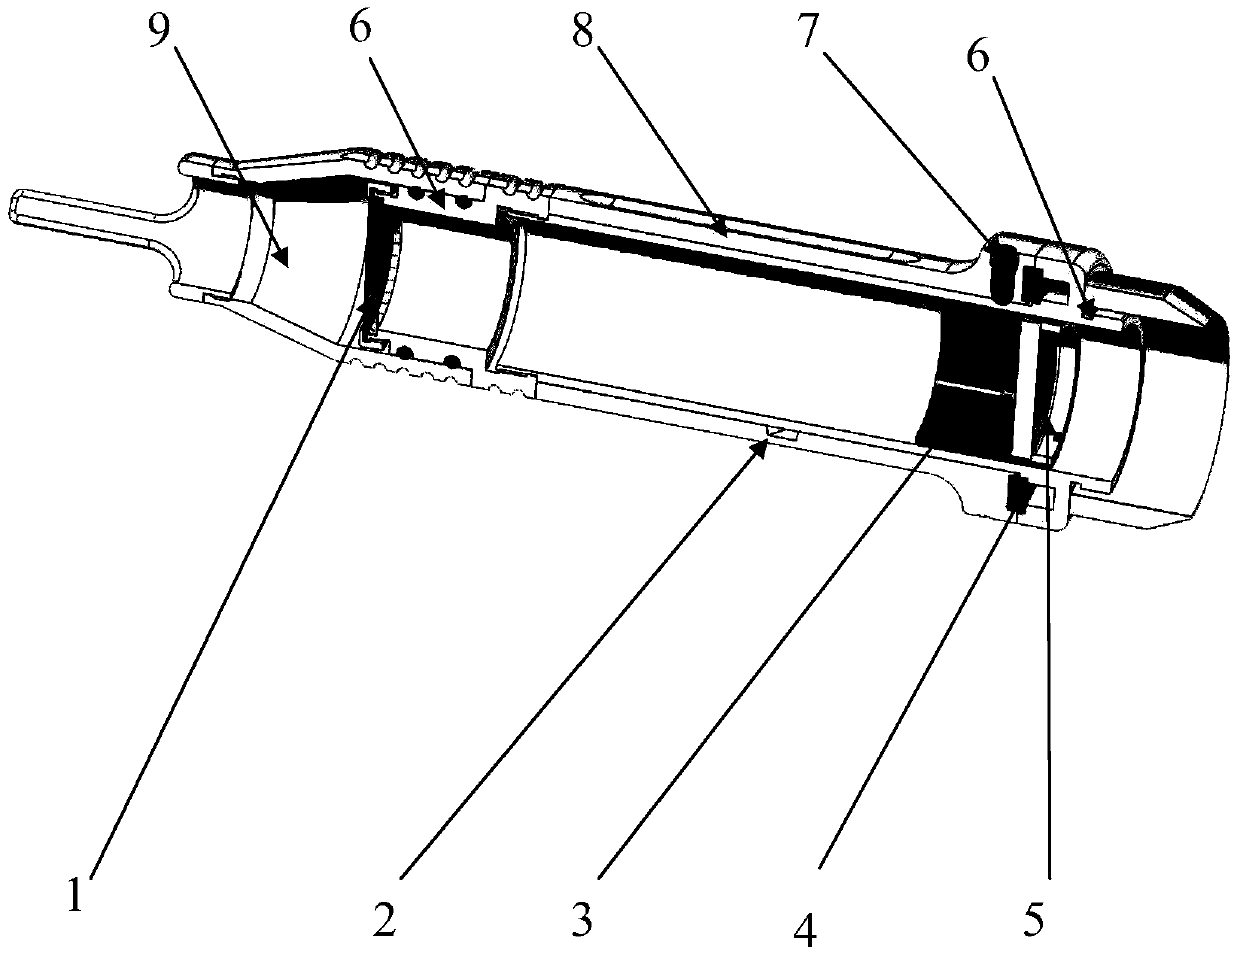 A hand tool for adjusting and identifying laser spot size